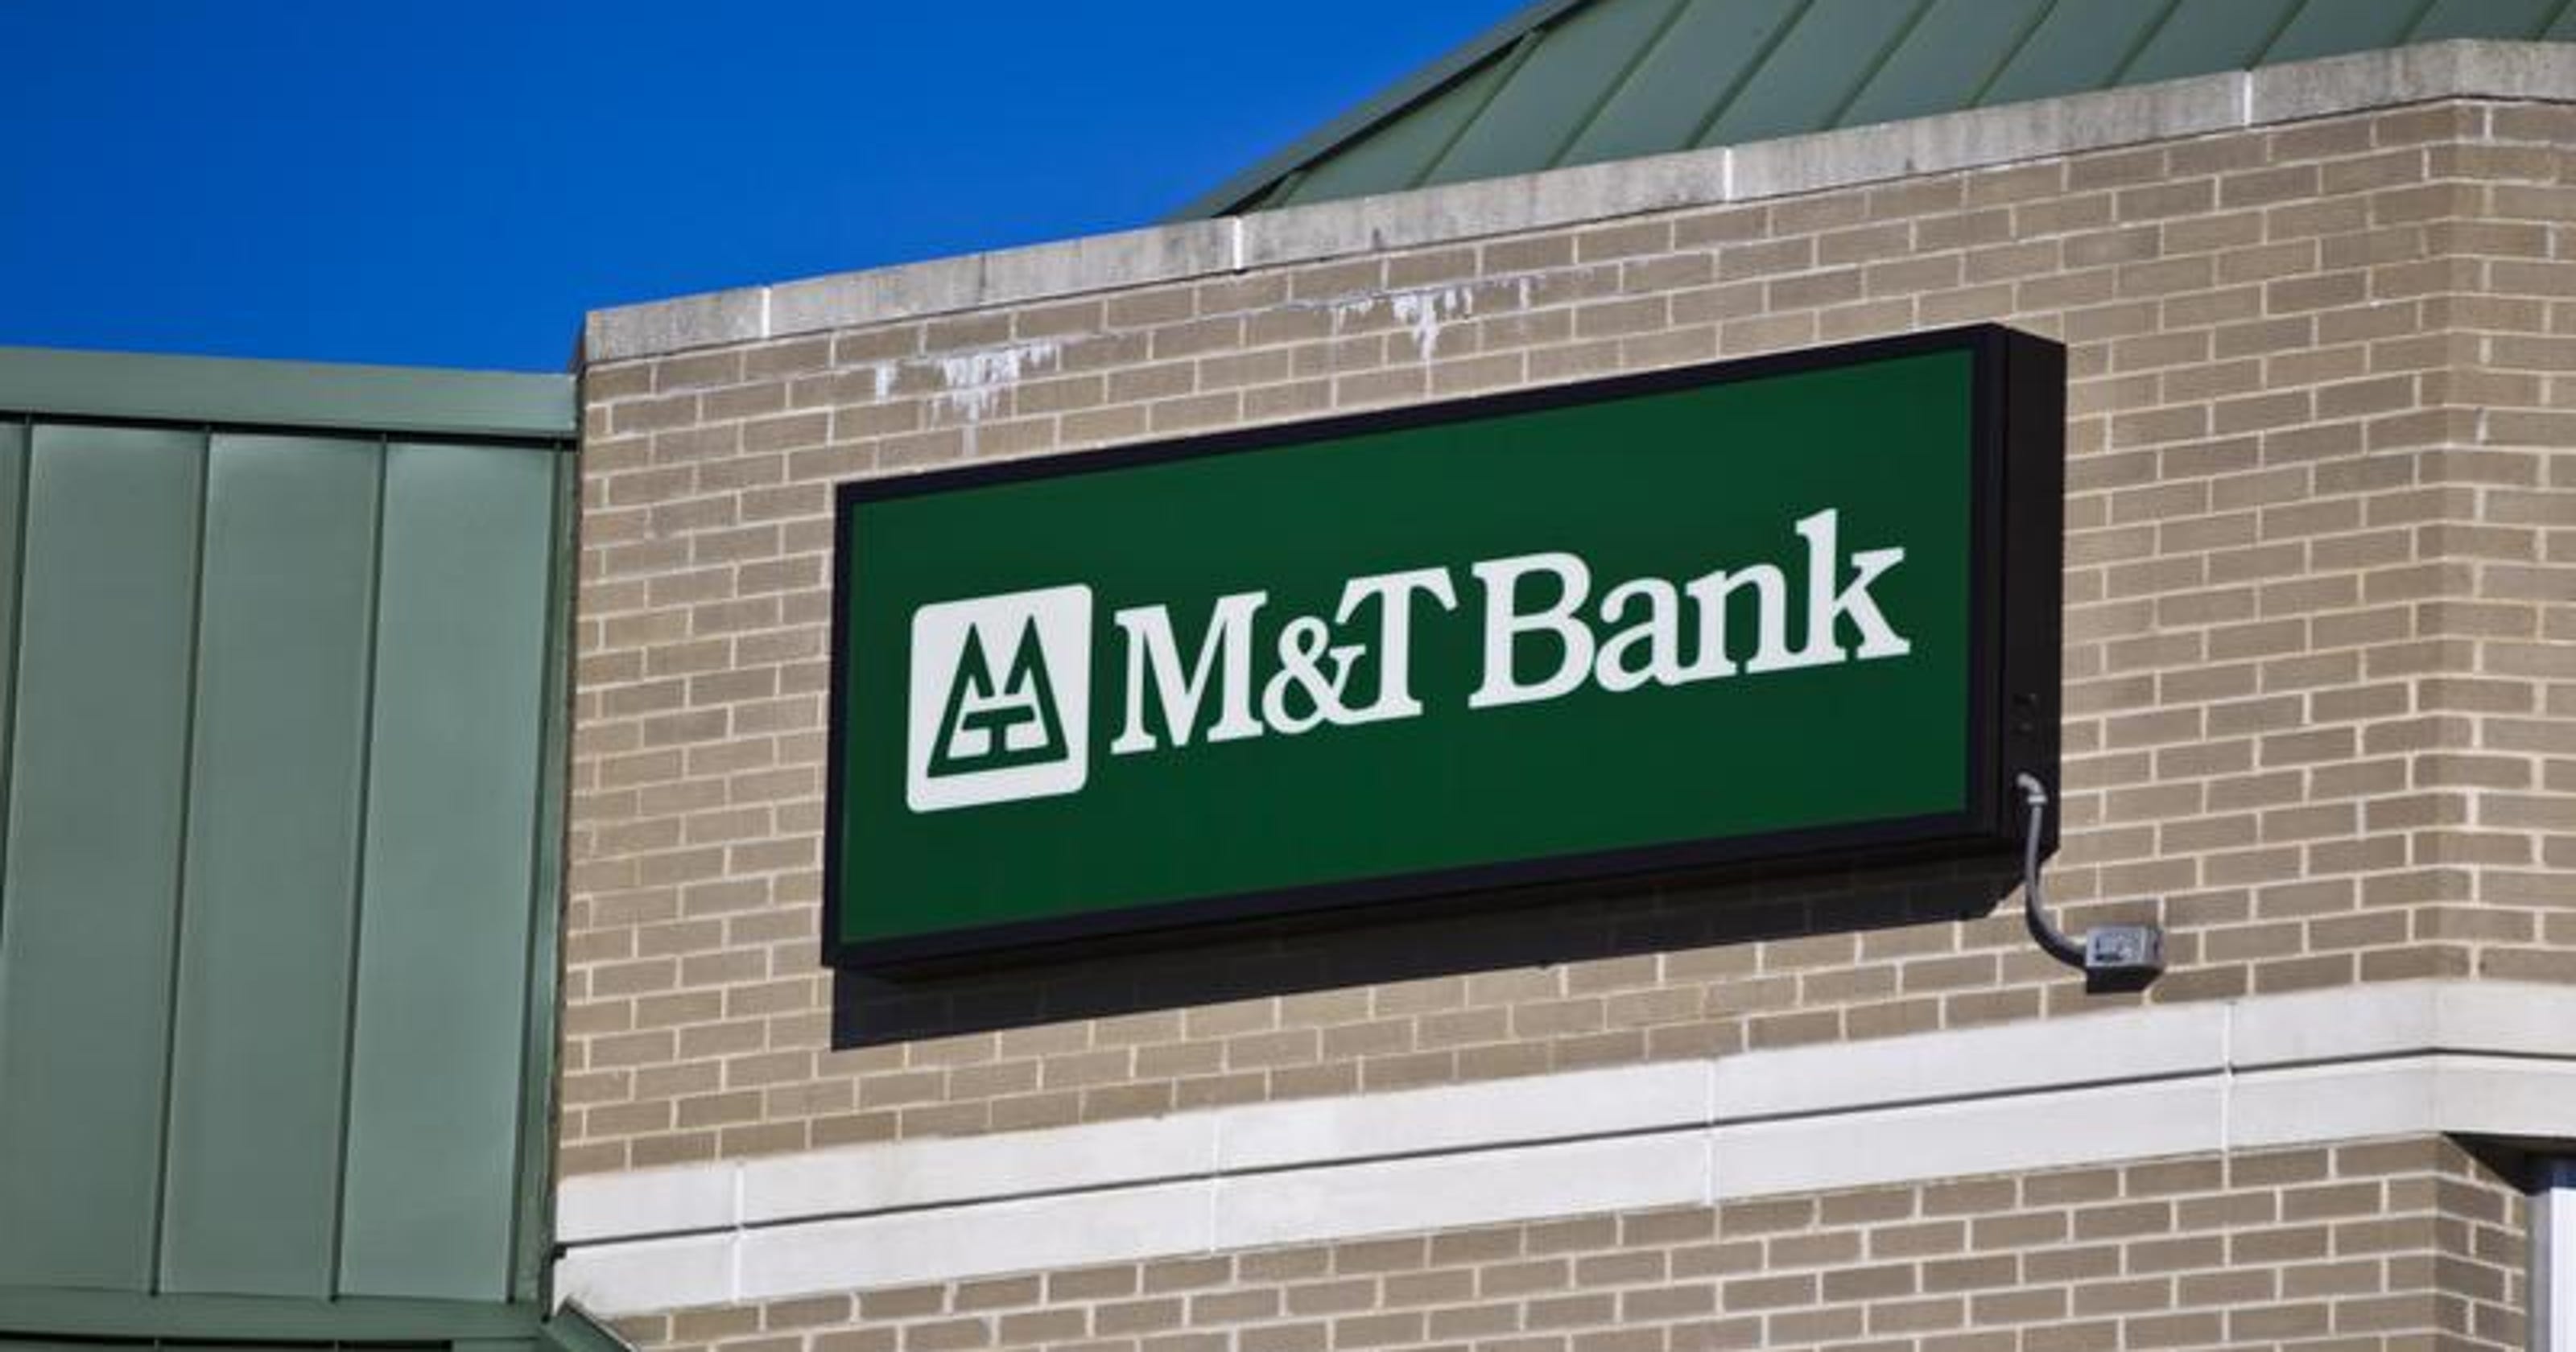 M&T Bank seeks nominees for charitable donation